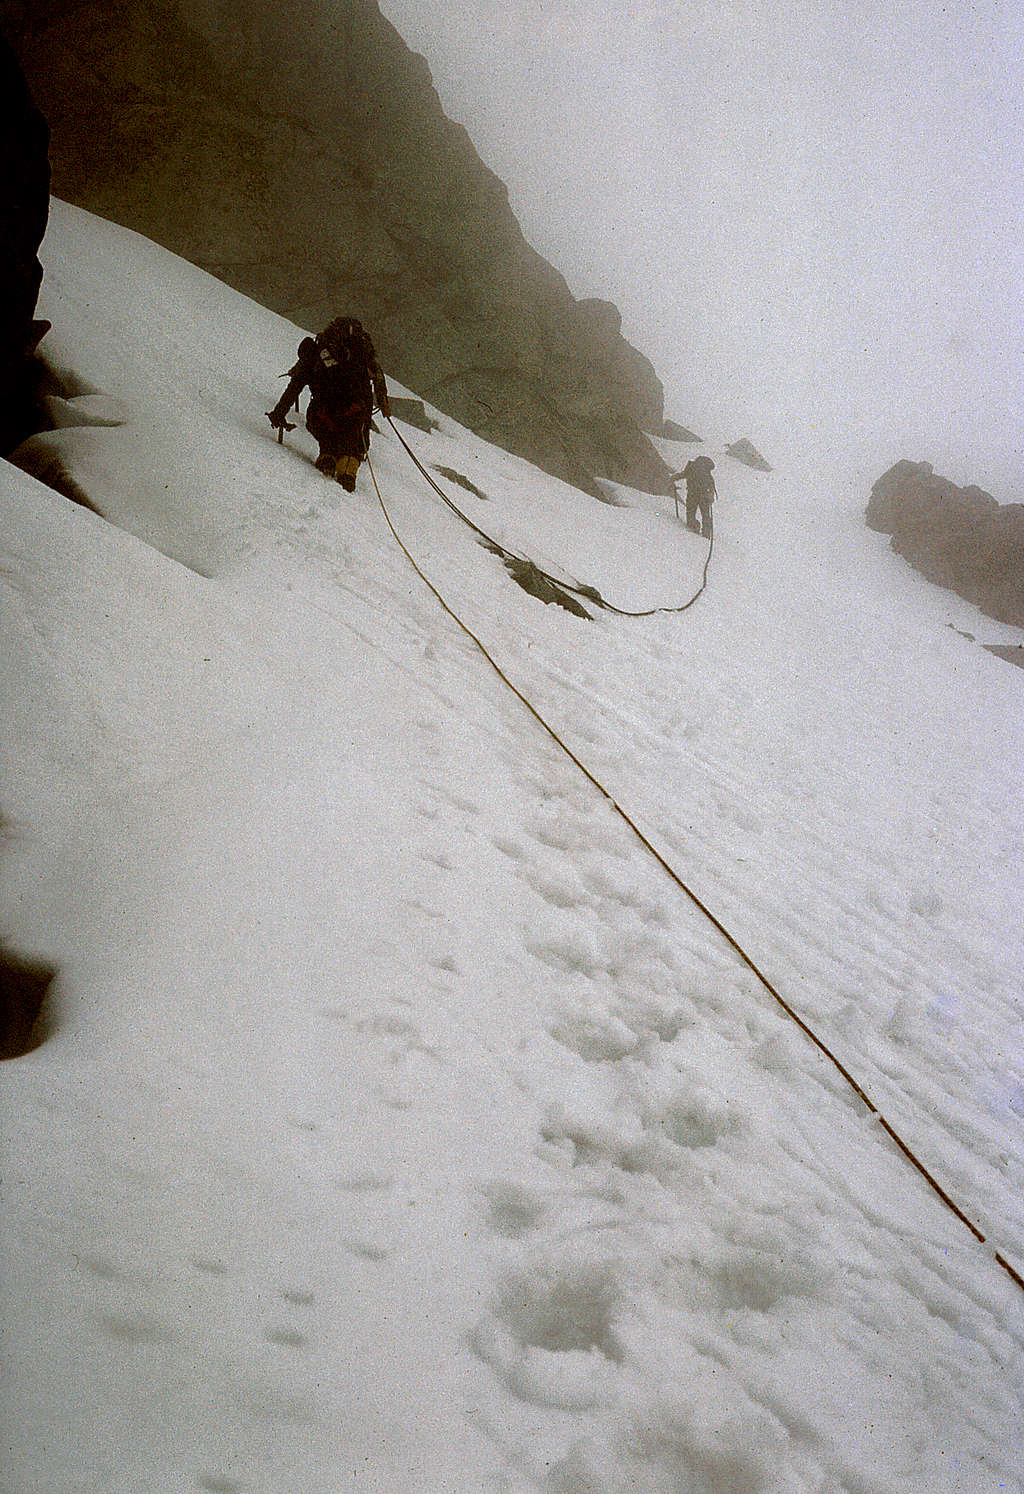 Mt. Stuart - traversing the upper snowfield in the clouds beneath the false summit